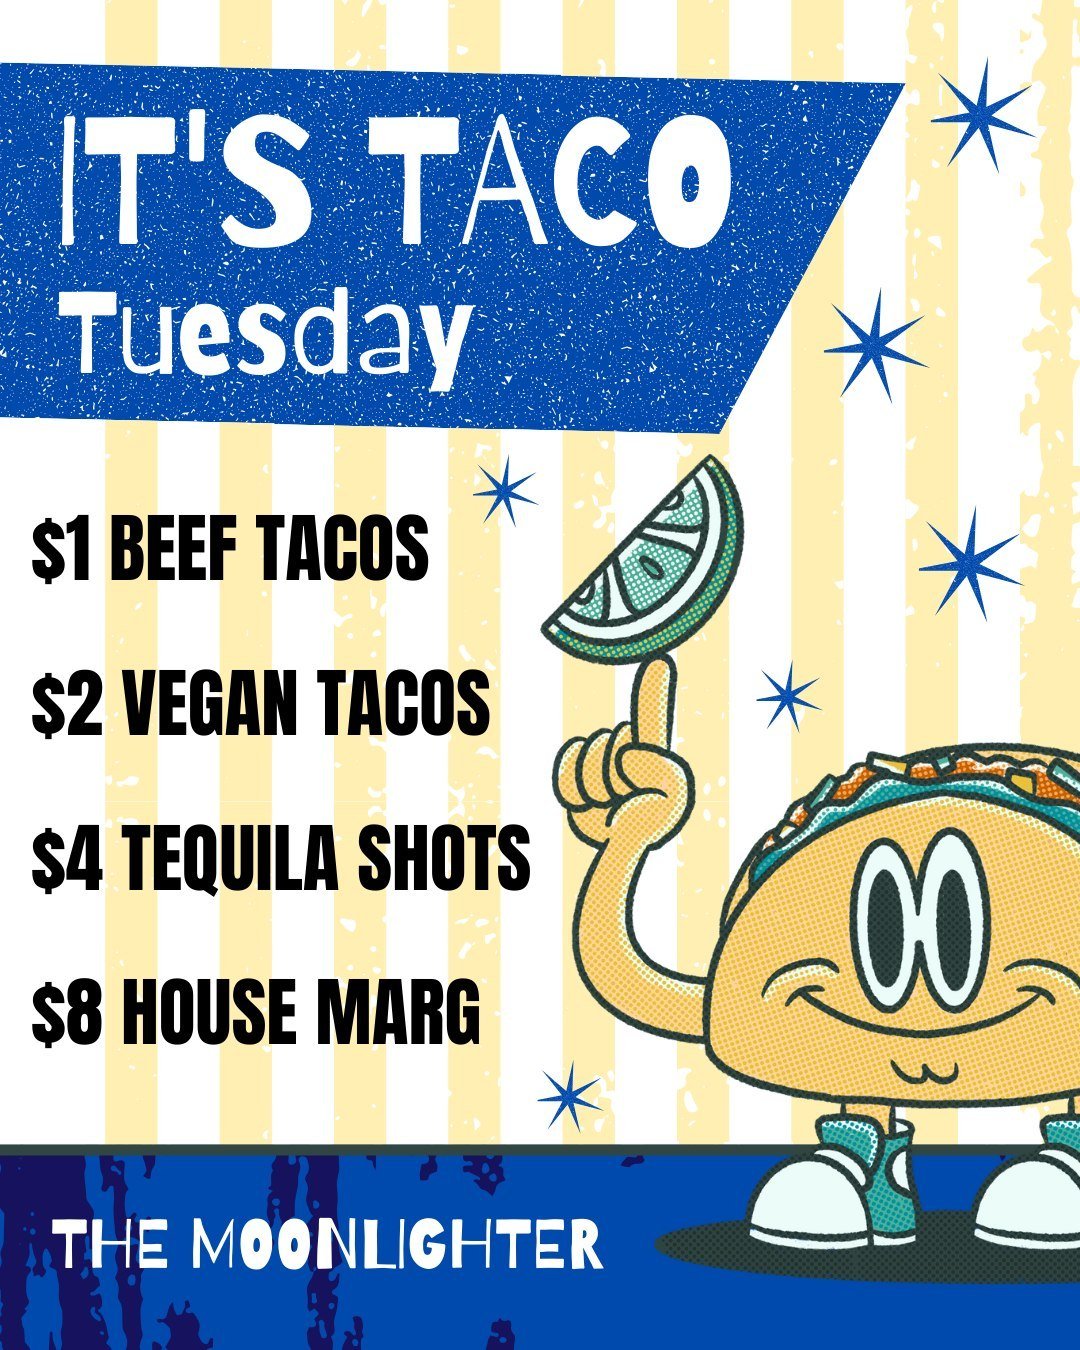 Tuesday, again? Good thing it&rsquo;s Taco Tuesday at the Moonlighter! All kinds of tasty deals, all night long. And don&rsquo;t forget about Happy Hour until 7pm! The Cubs game is at 6:20 and the Sox play at 6:40pm. Let&rsquo;s have a good night!⁠
⁠